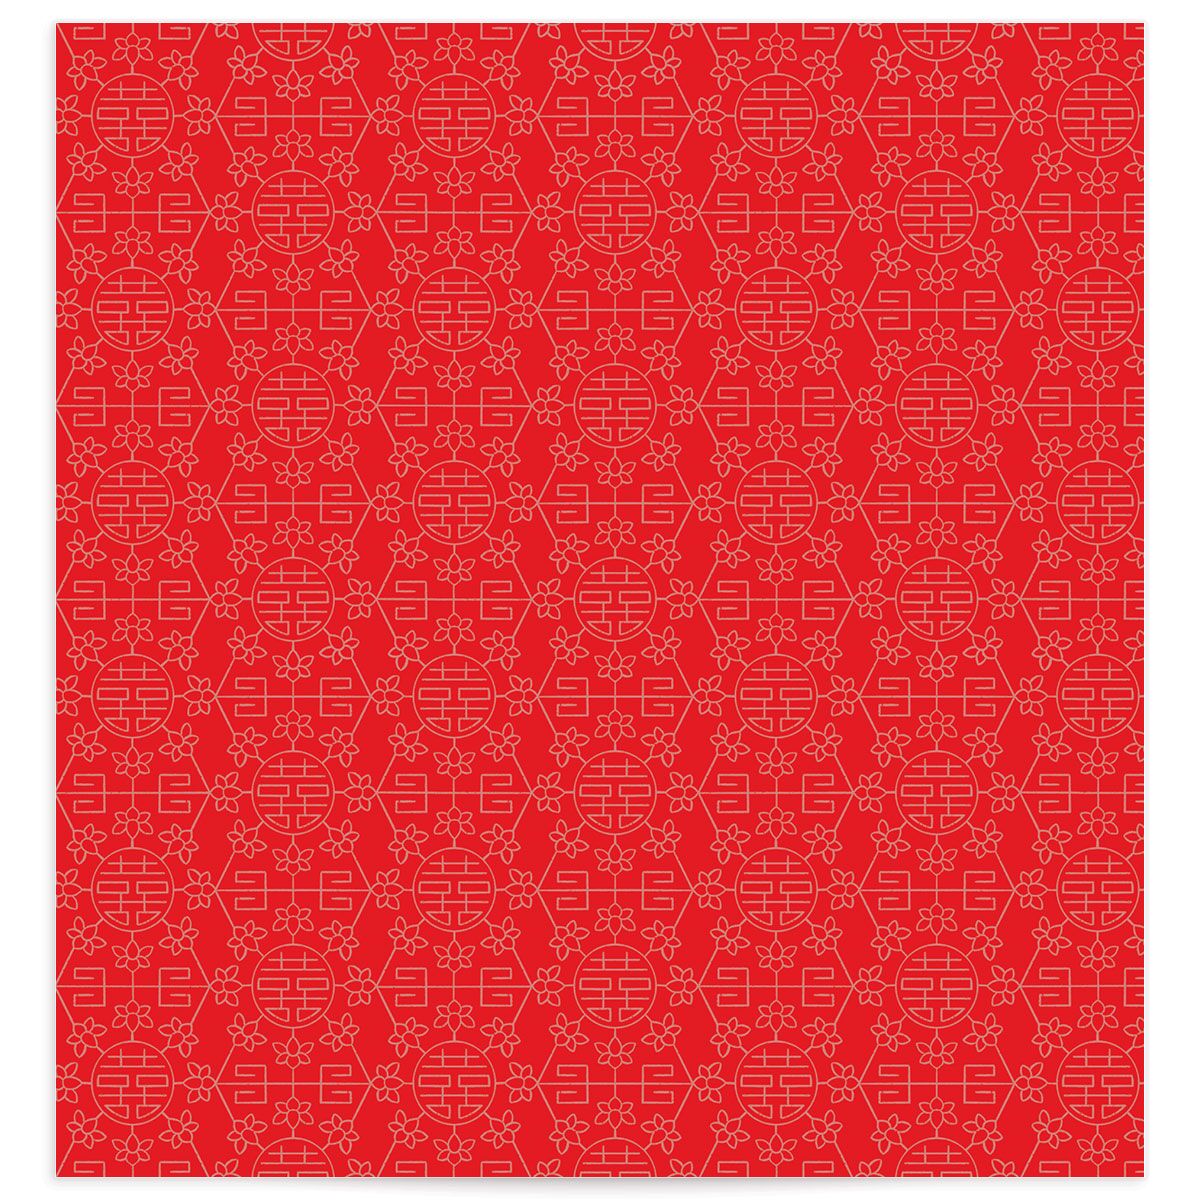 Double Happiness Standard Envelope Liners front in red